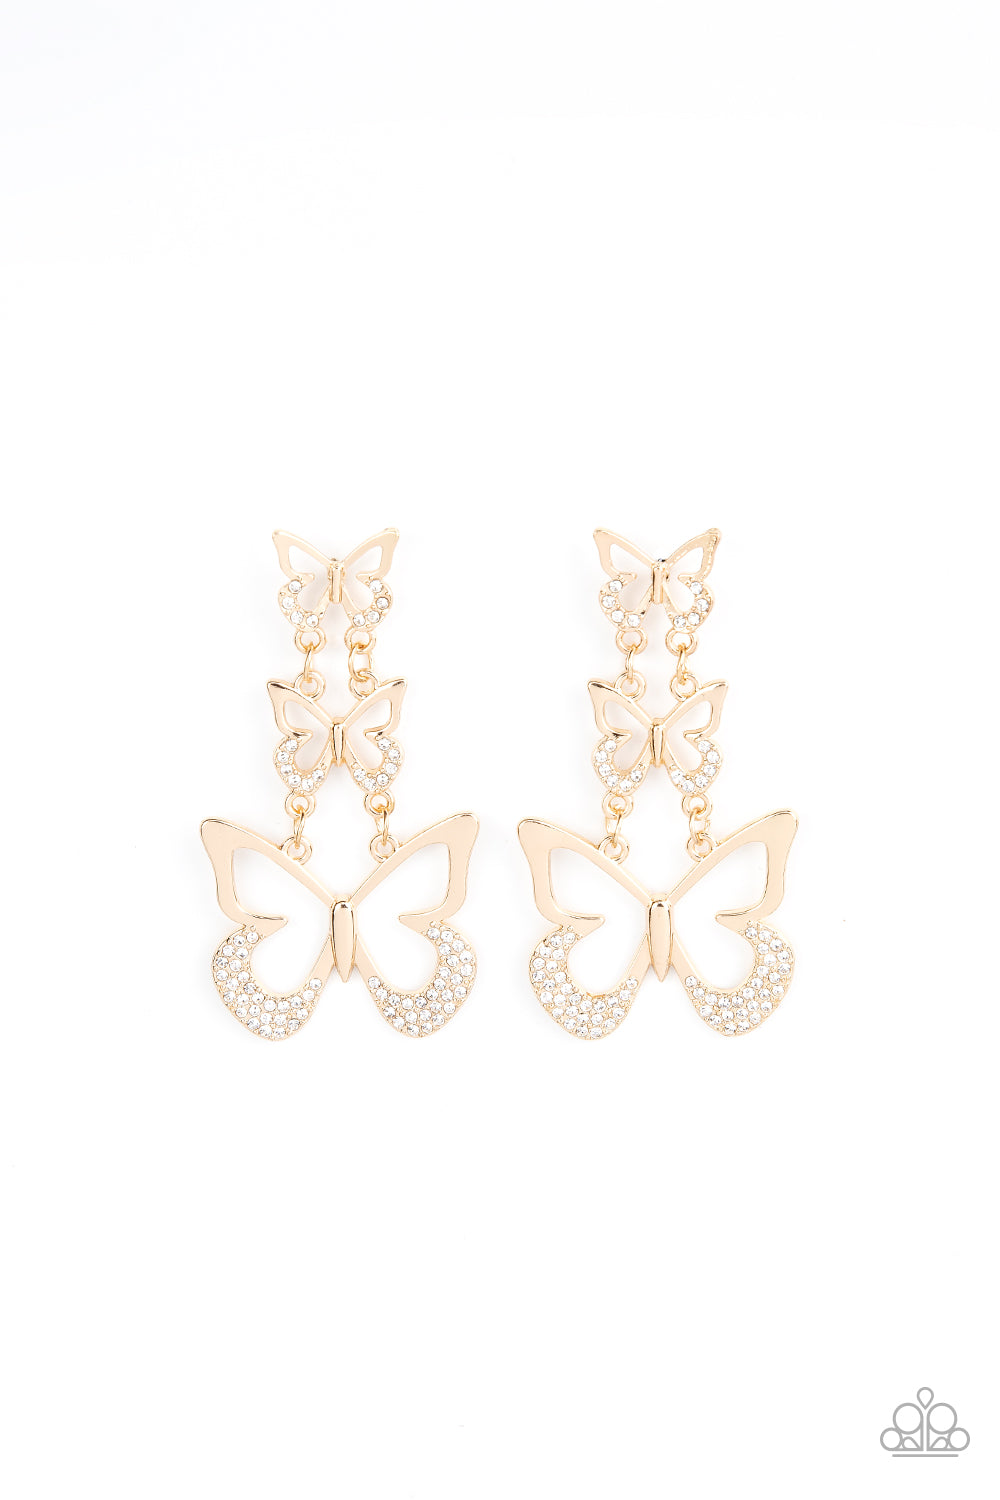 Flamboyant Flutter Gold Butterfly Earring - Paparazzi Accessories  An airy trio of gold butterflies gradually increase in size as they link into a whimsical lure. The bottom of each butterfly has been dipped in white rhinestones, adding a glitzy finish to the fluttering centerpiece. Earring attaches to a standard post fitting.  Sold as one pair of post earrings.